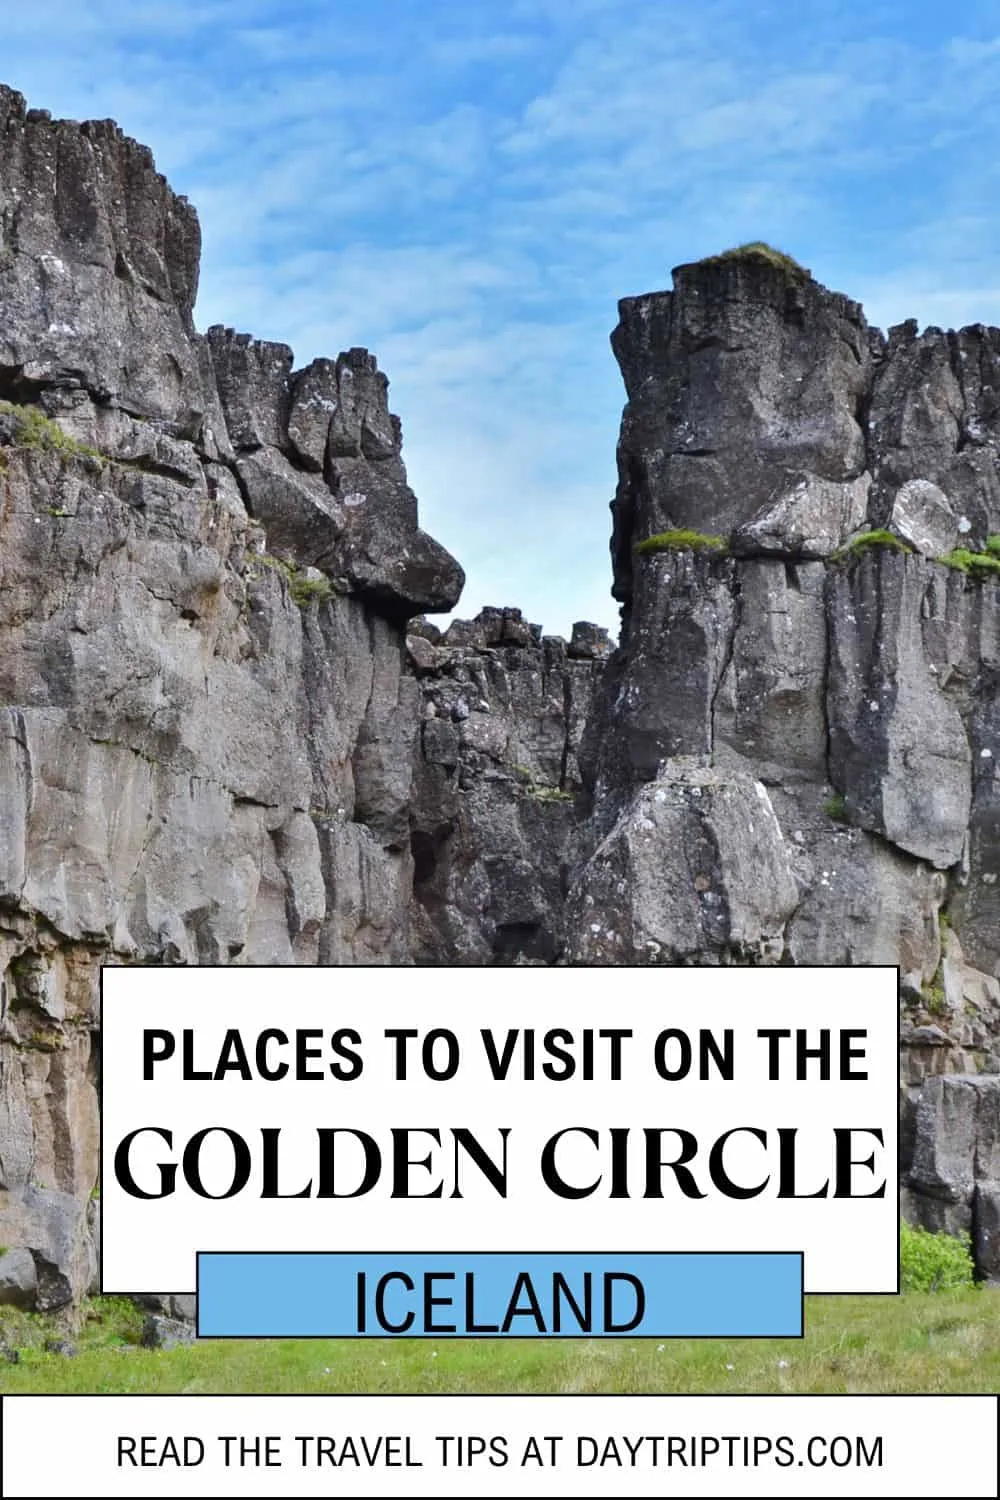 Places to Visit on the Golden Circle (Iceland)